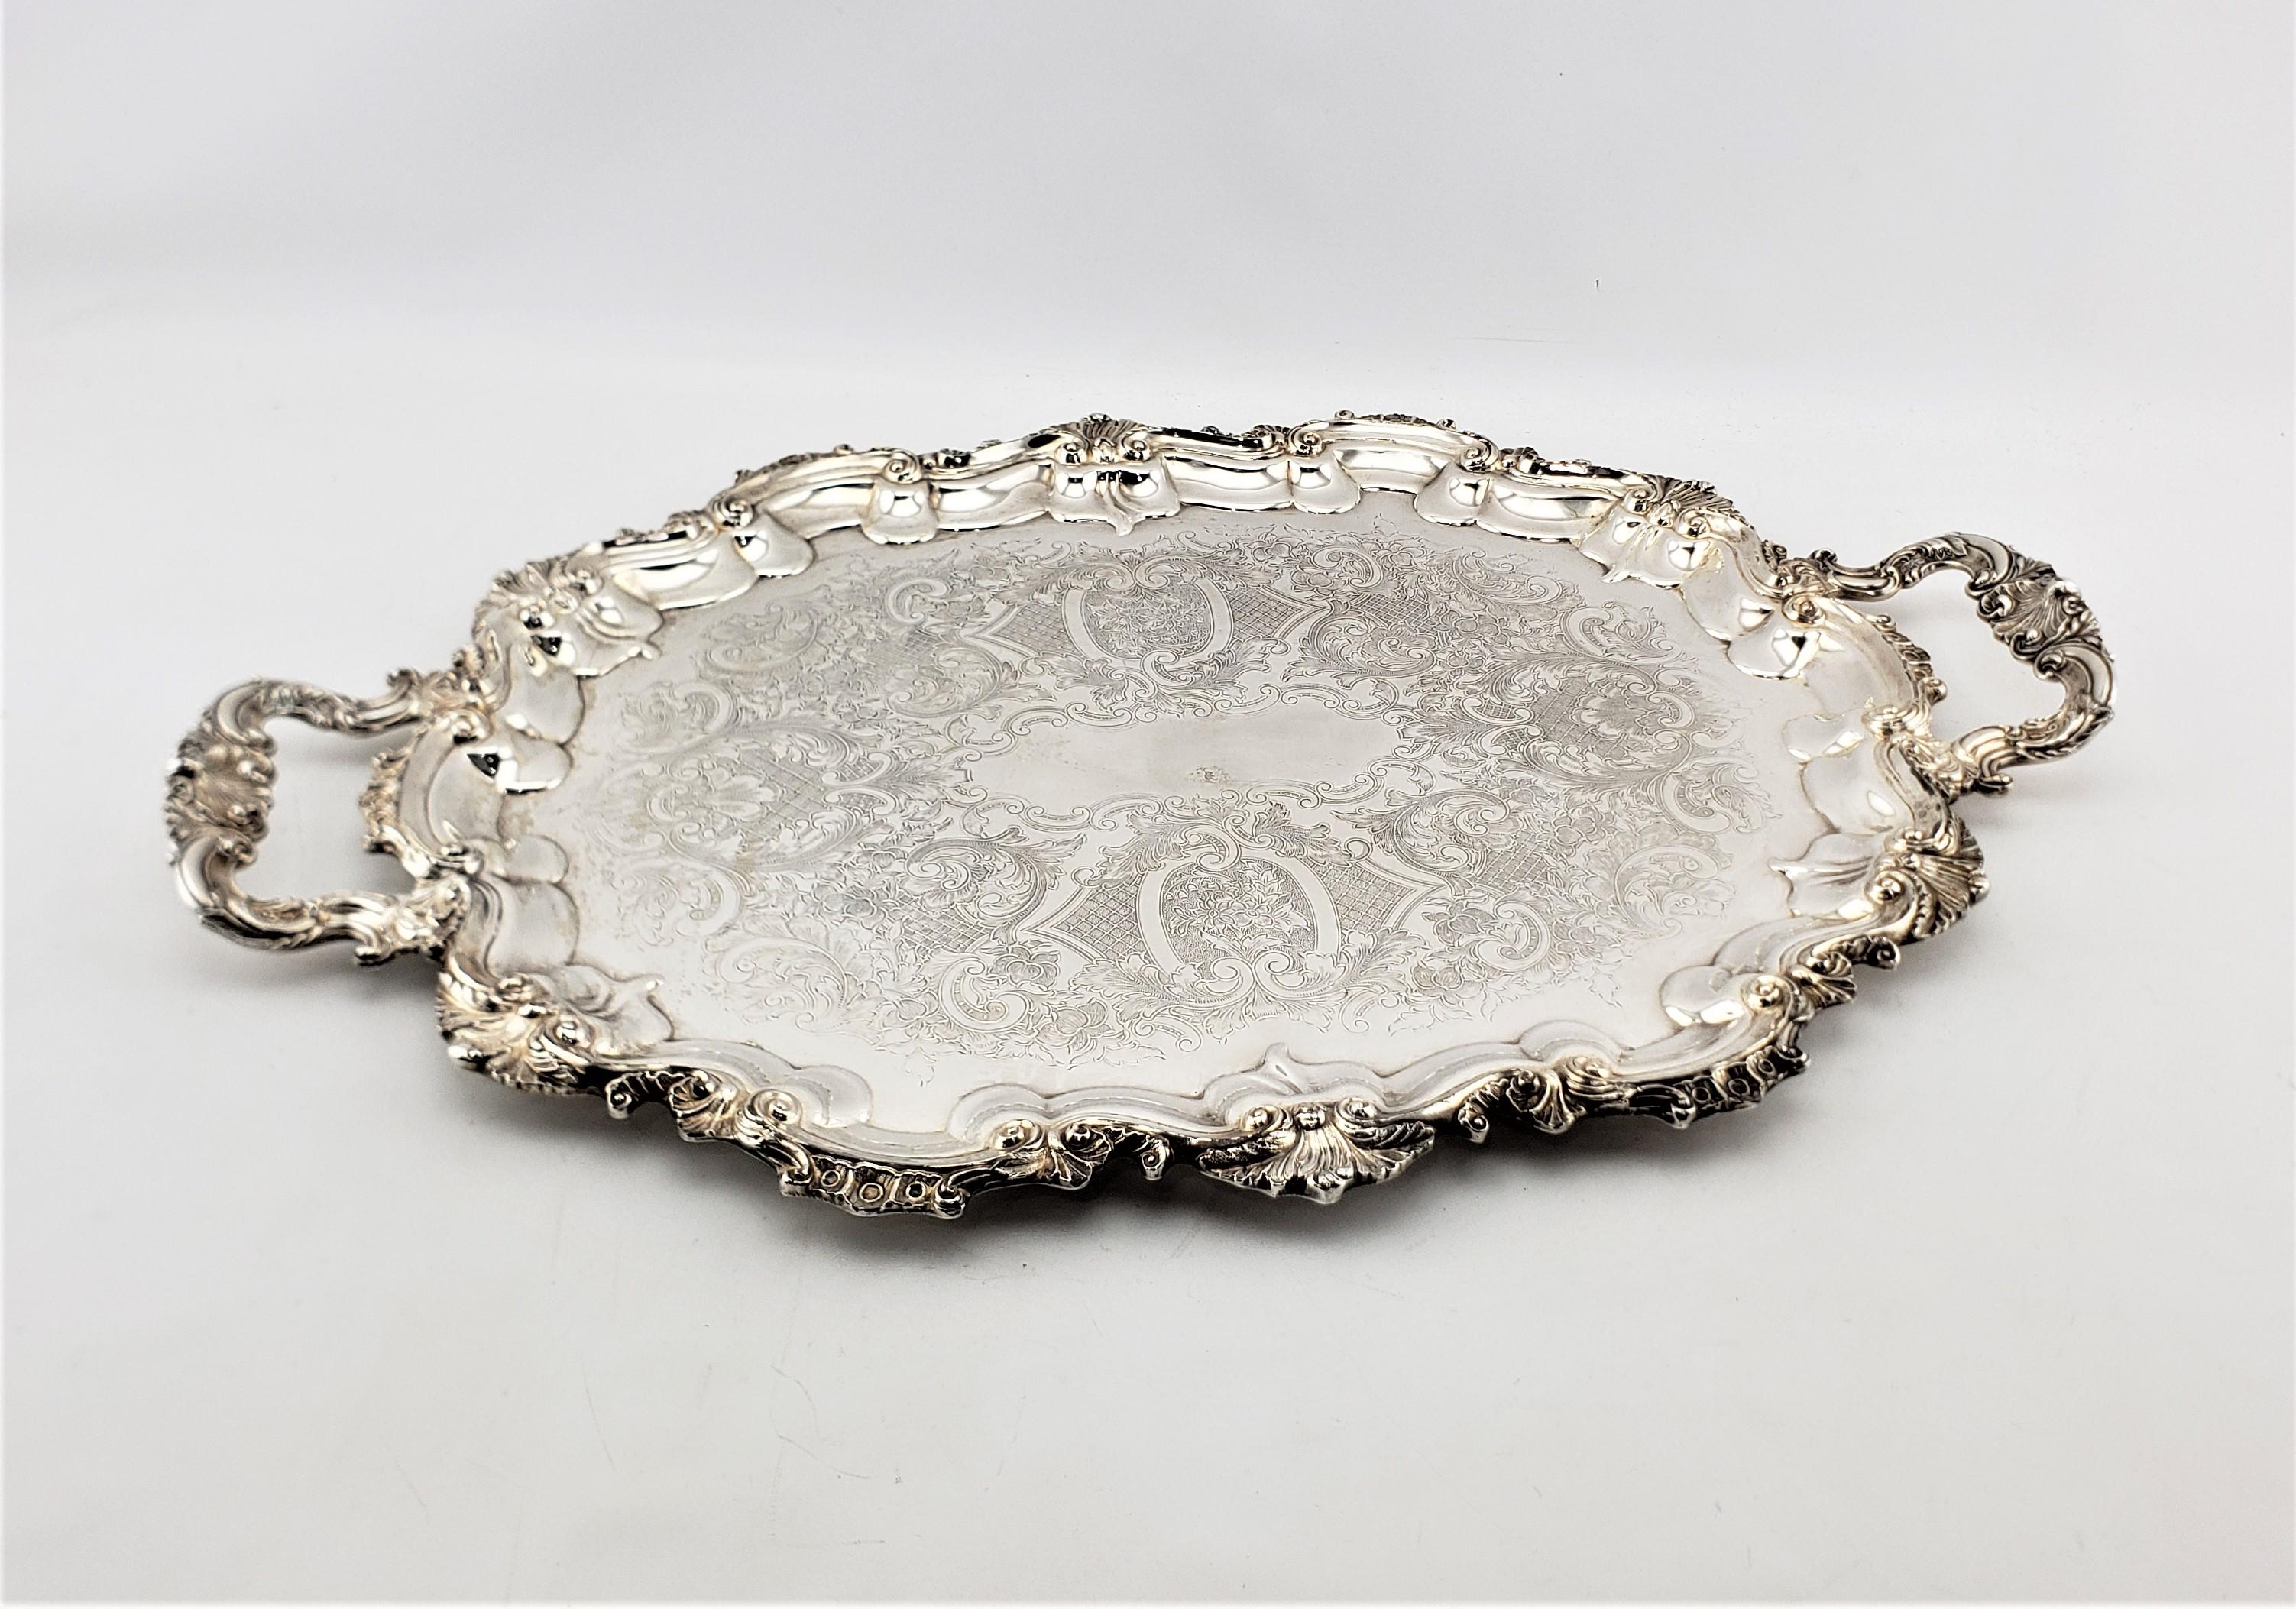 This large antique silver plated serving tray was made by the well known Primrose Plate company of Canada and dates to approximately 1920 and done in a Victorian style. The tray is ornately decorated along the sides with stylized shell and leaves